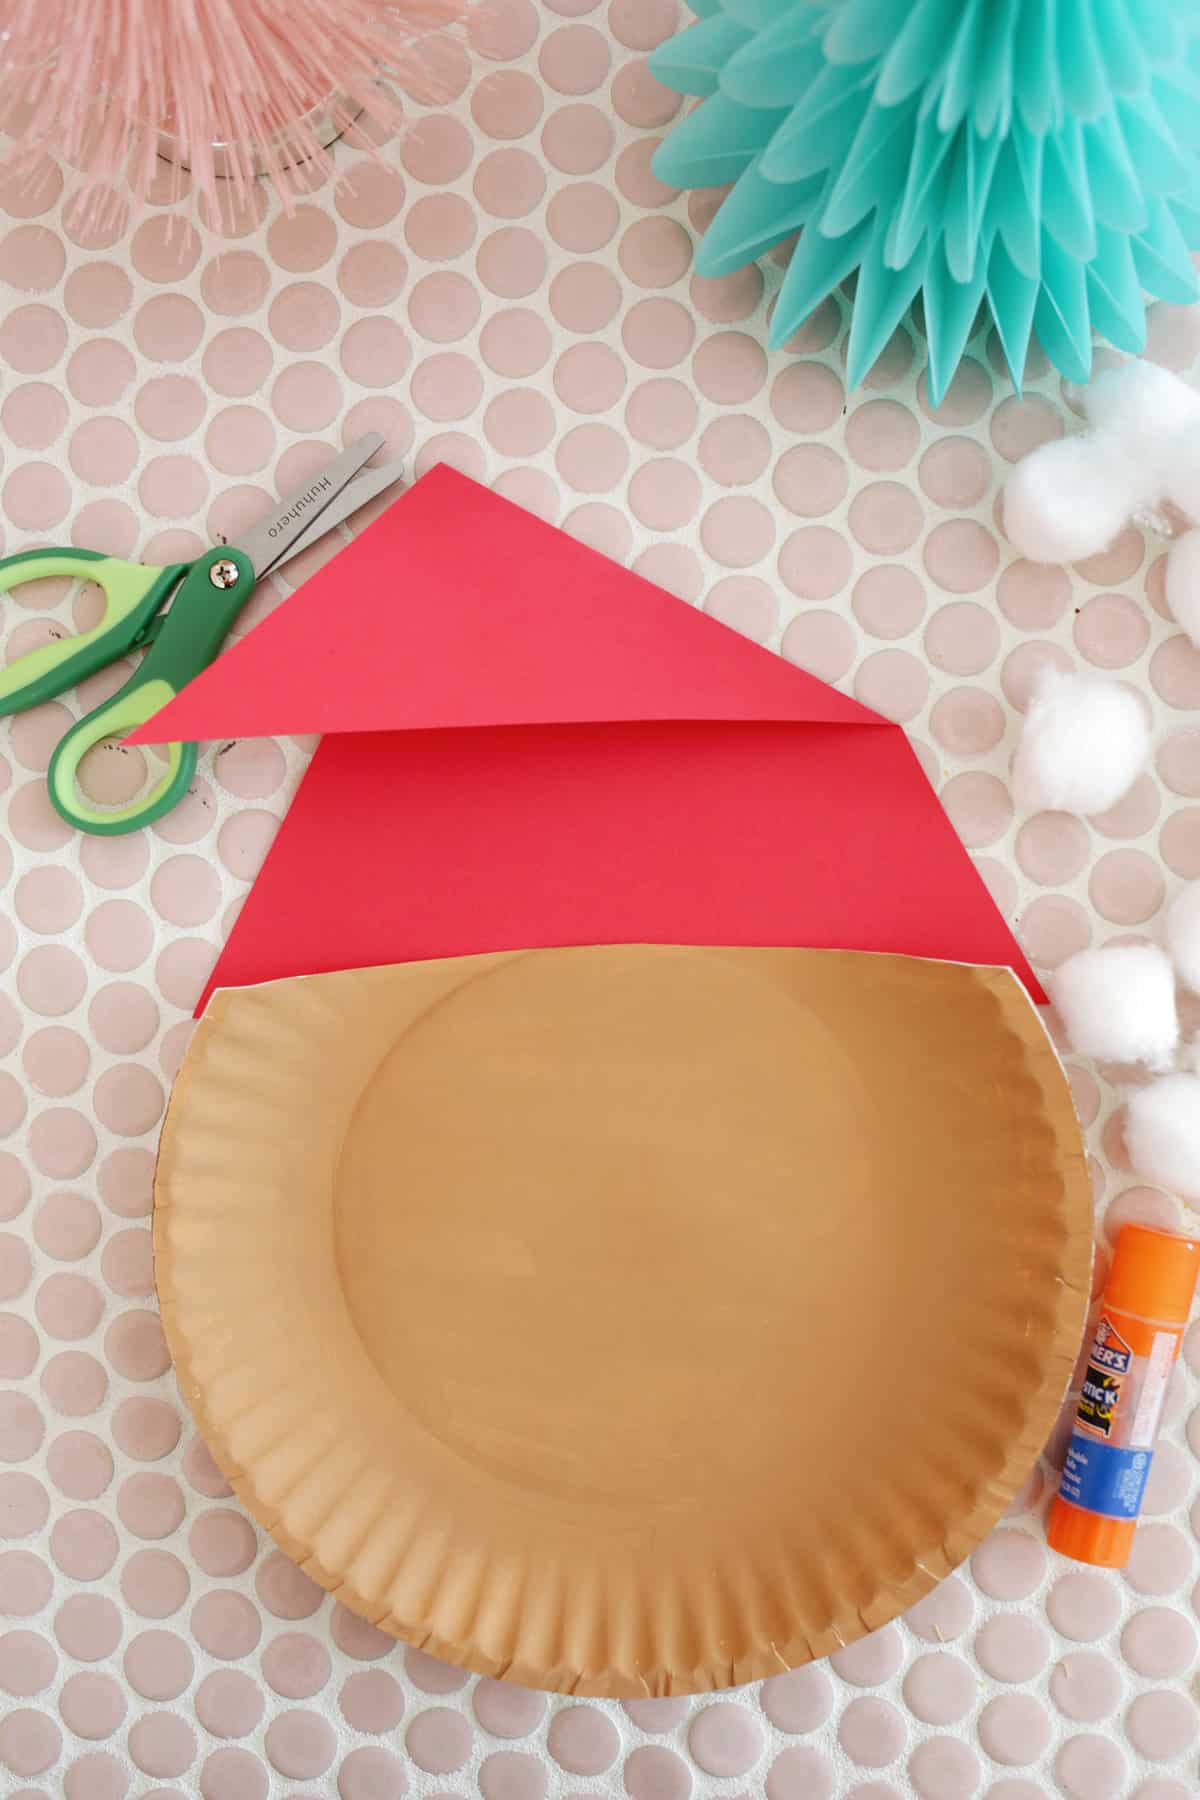 making a red triangle hat for a paper plate santa